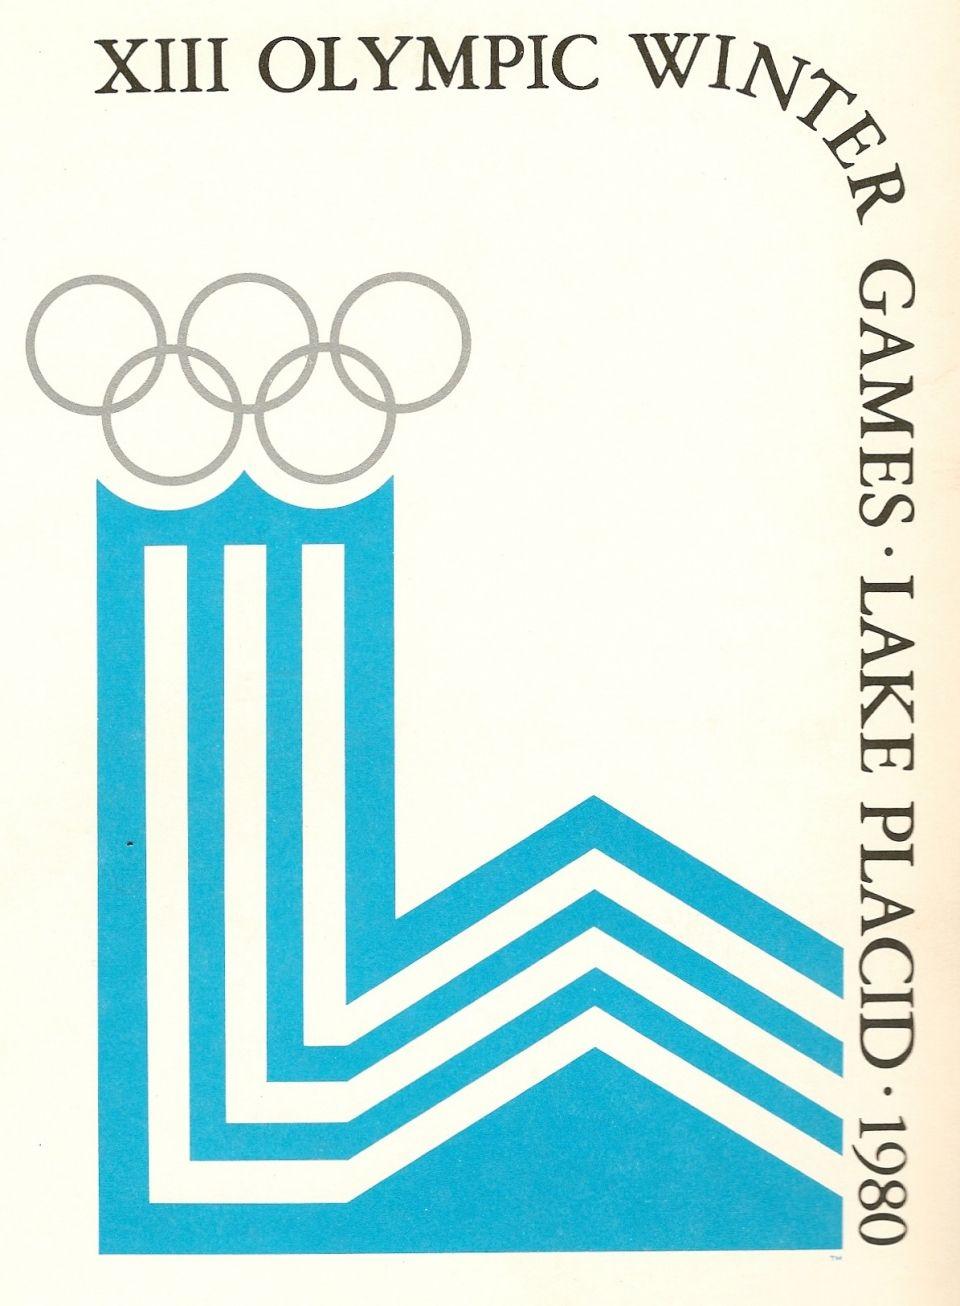 Placid Logo - 1980 Winter Olympic Games | Libraries